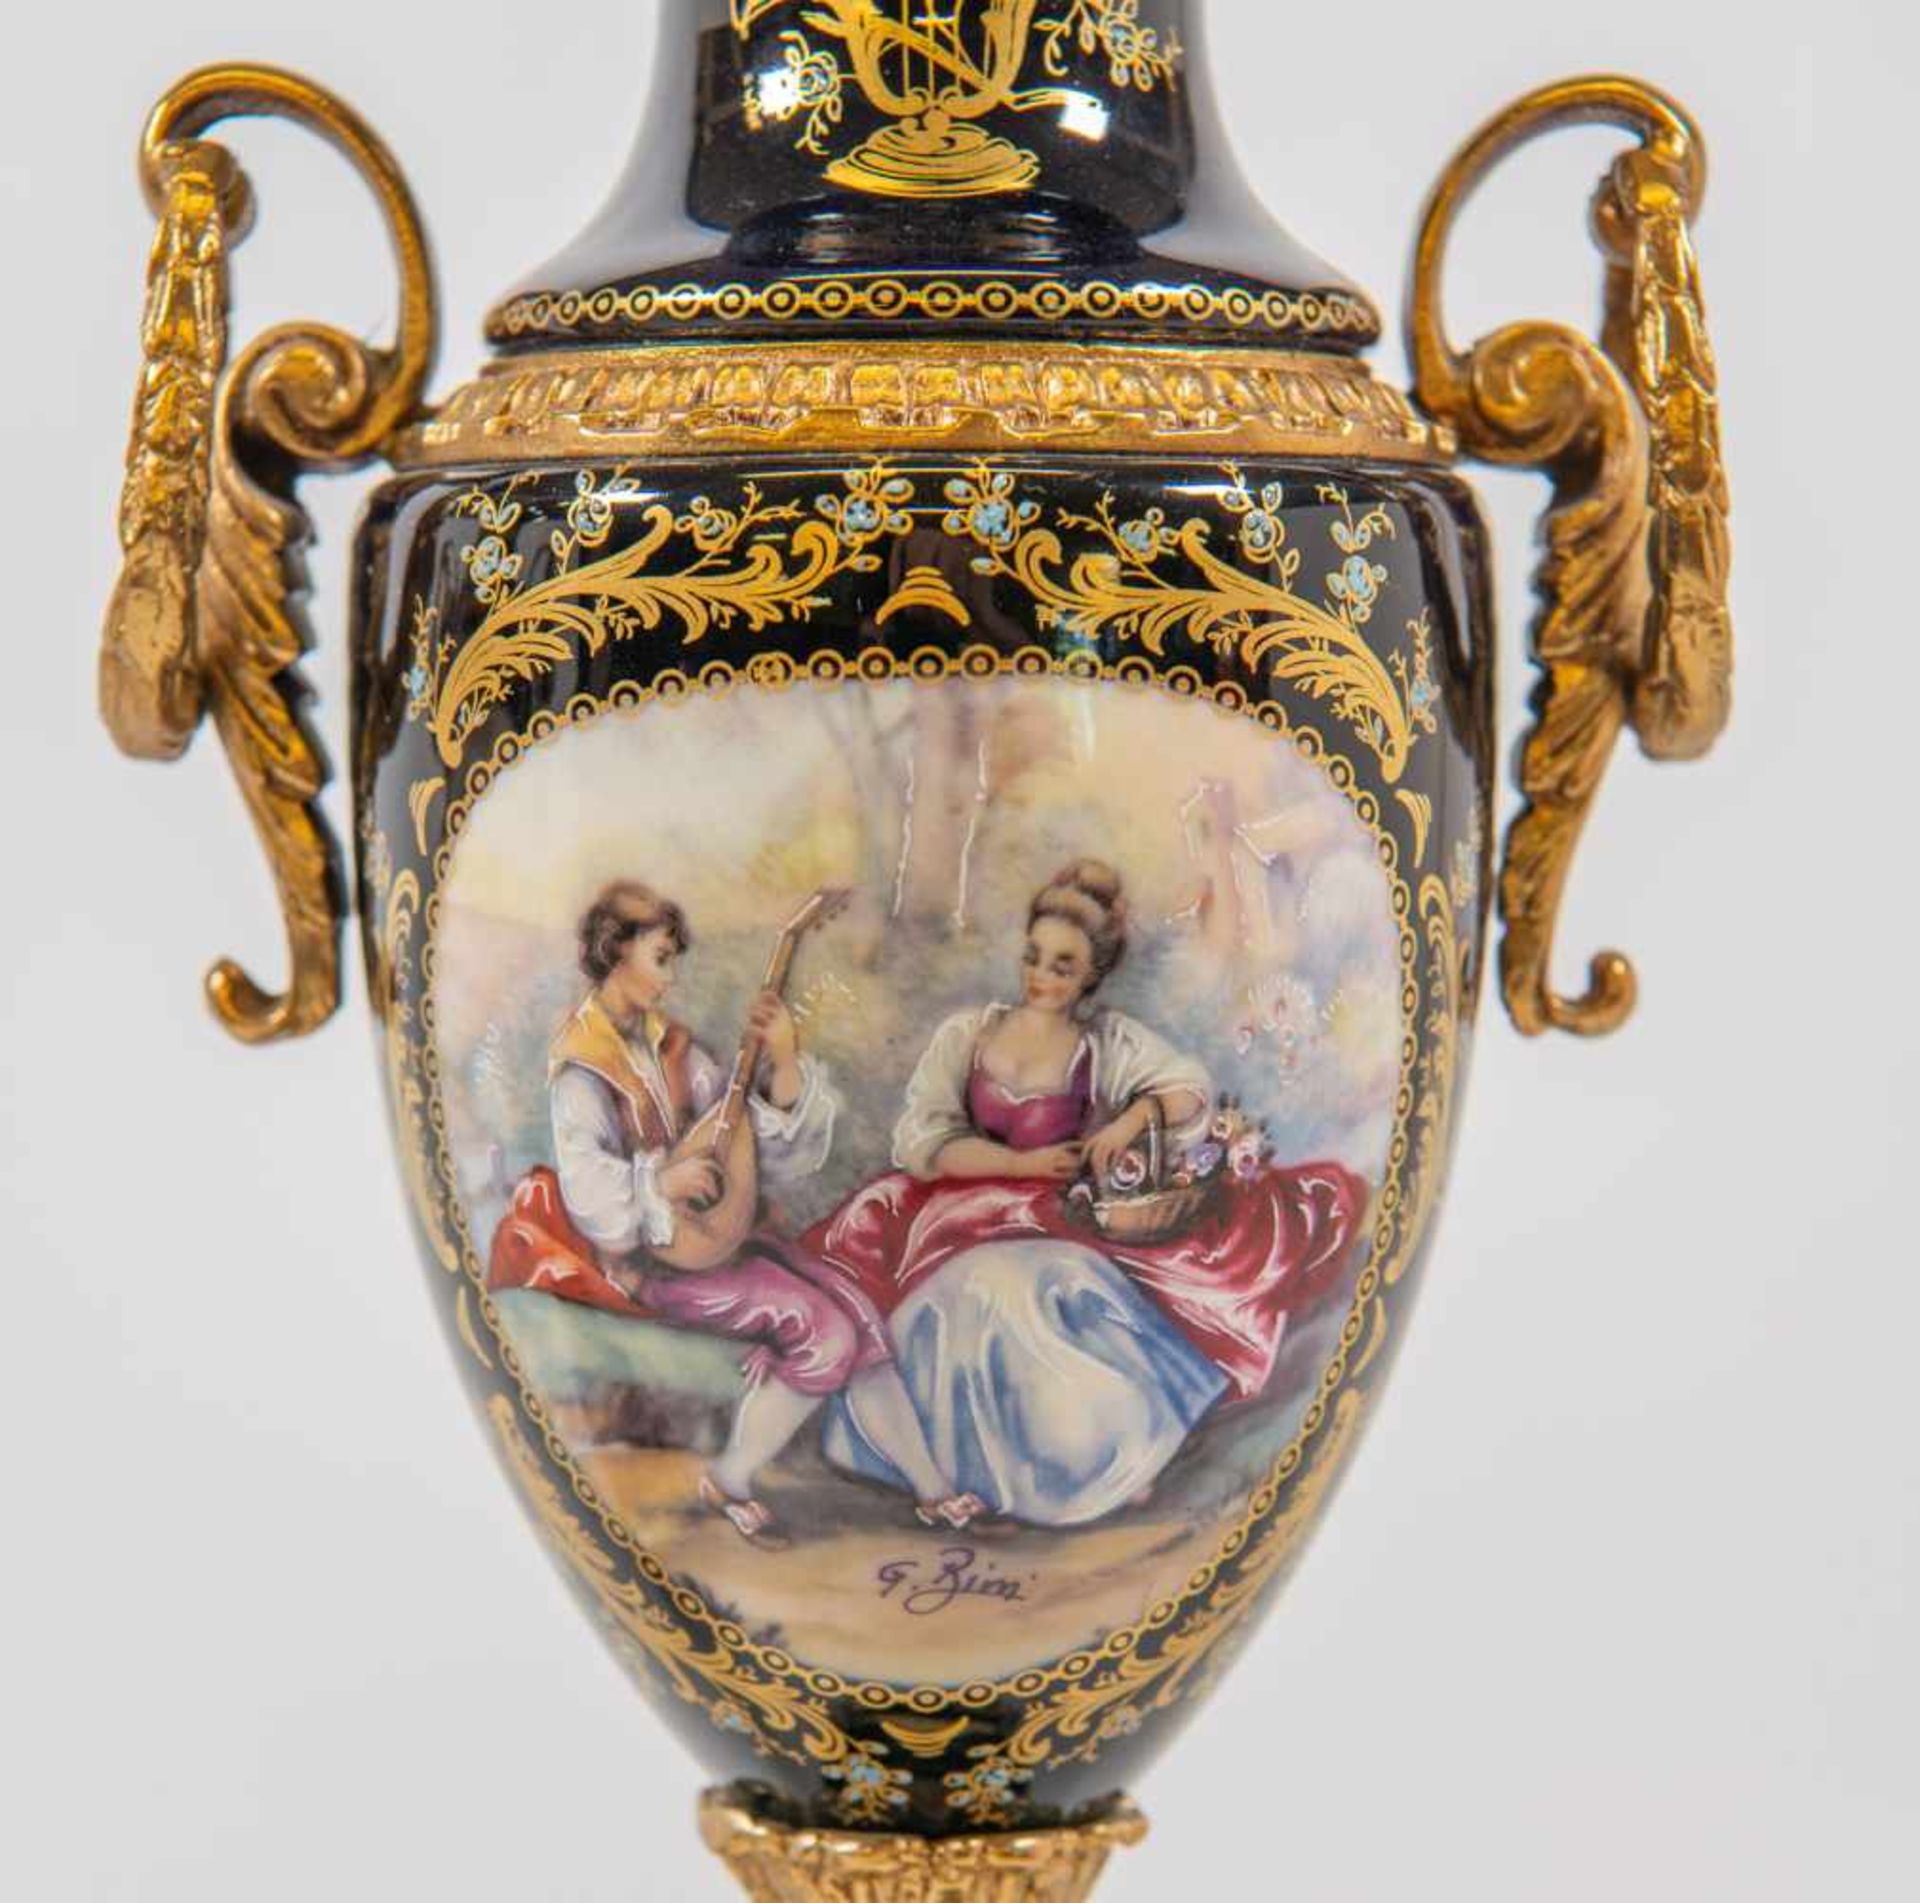 A.C.F. Decor de Sèvres, Pair of young vases, handpainted decor signed G. Rimi, bronze mounted. - Image 4 of 7